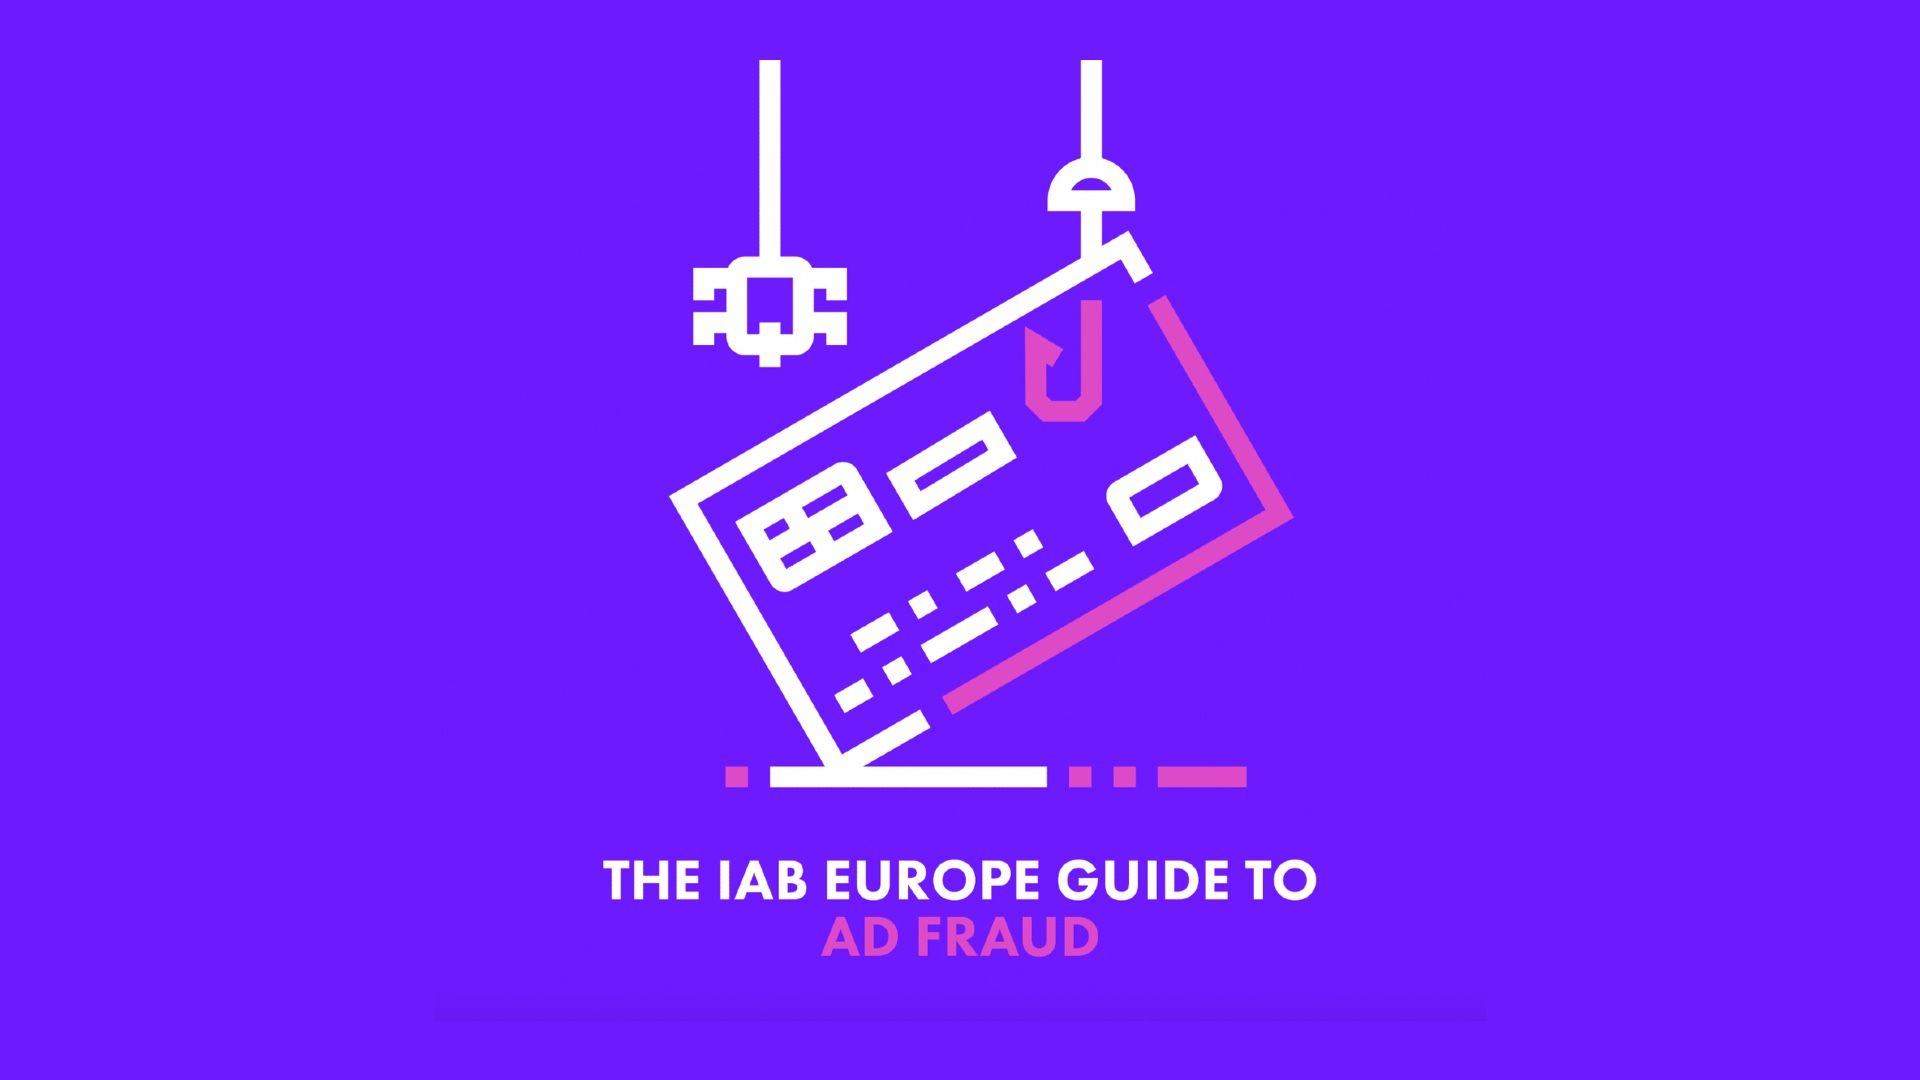 IAB Europe releases a Guide to Ad Fraud